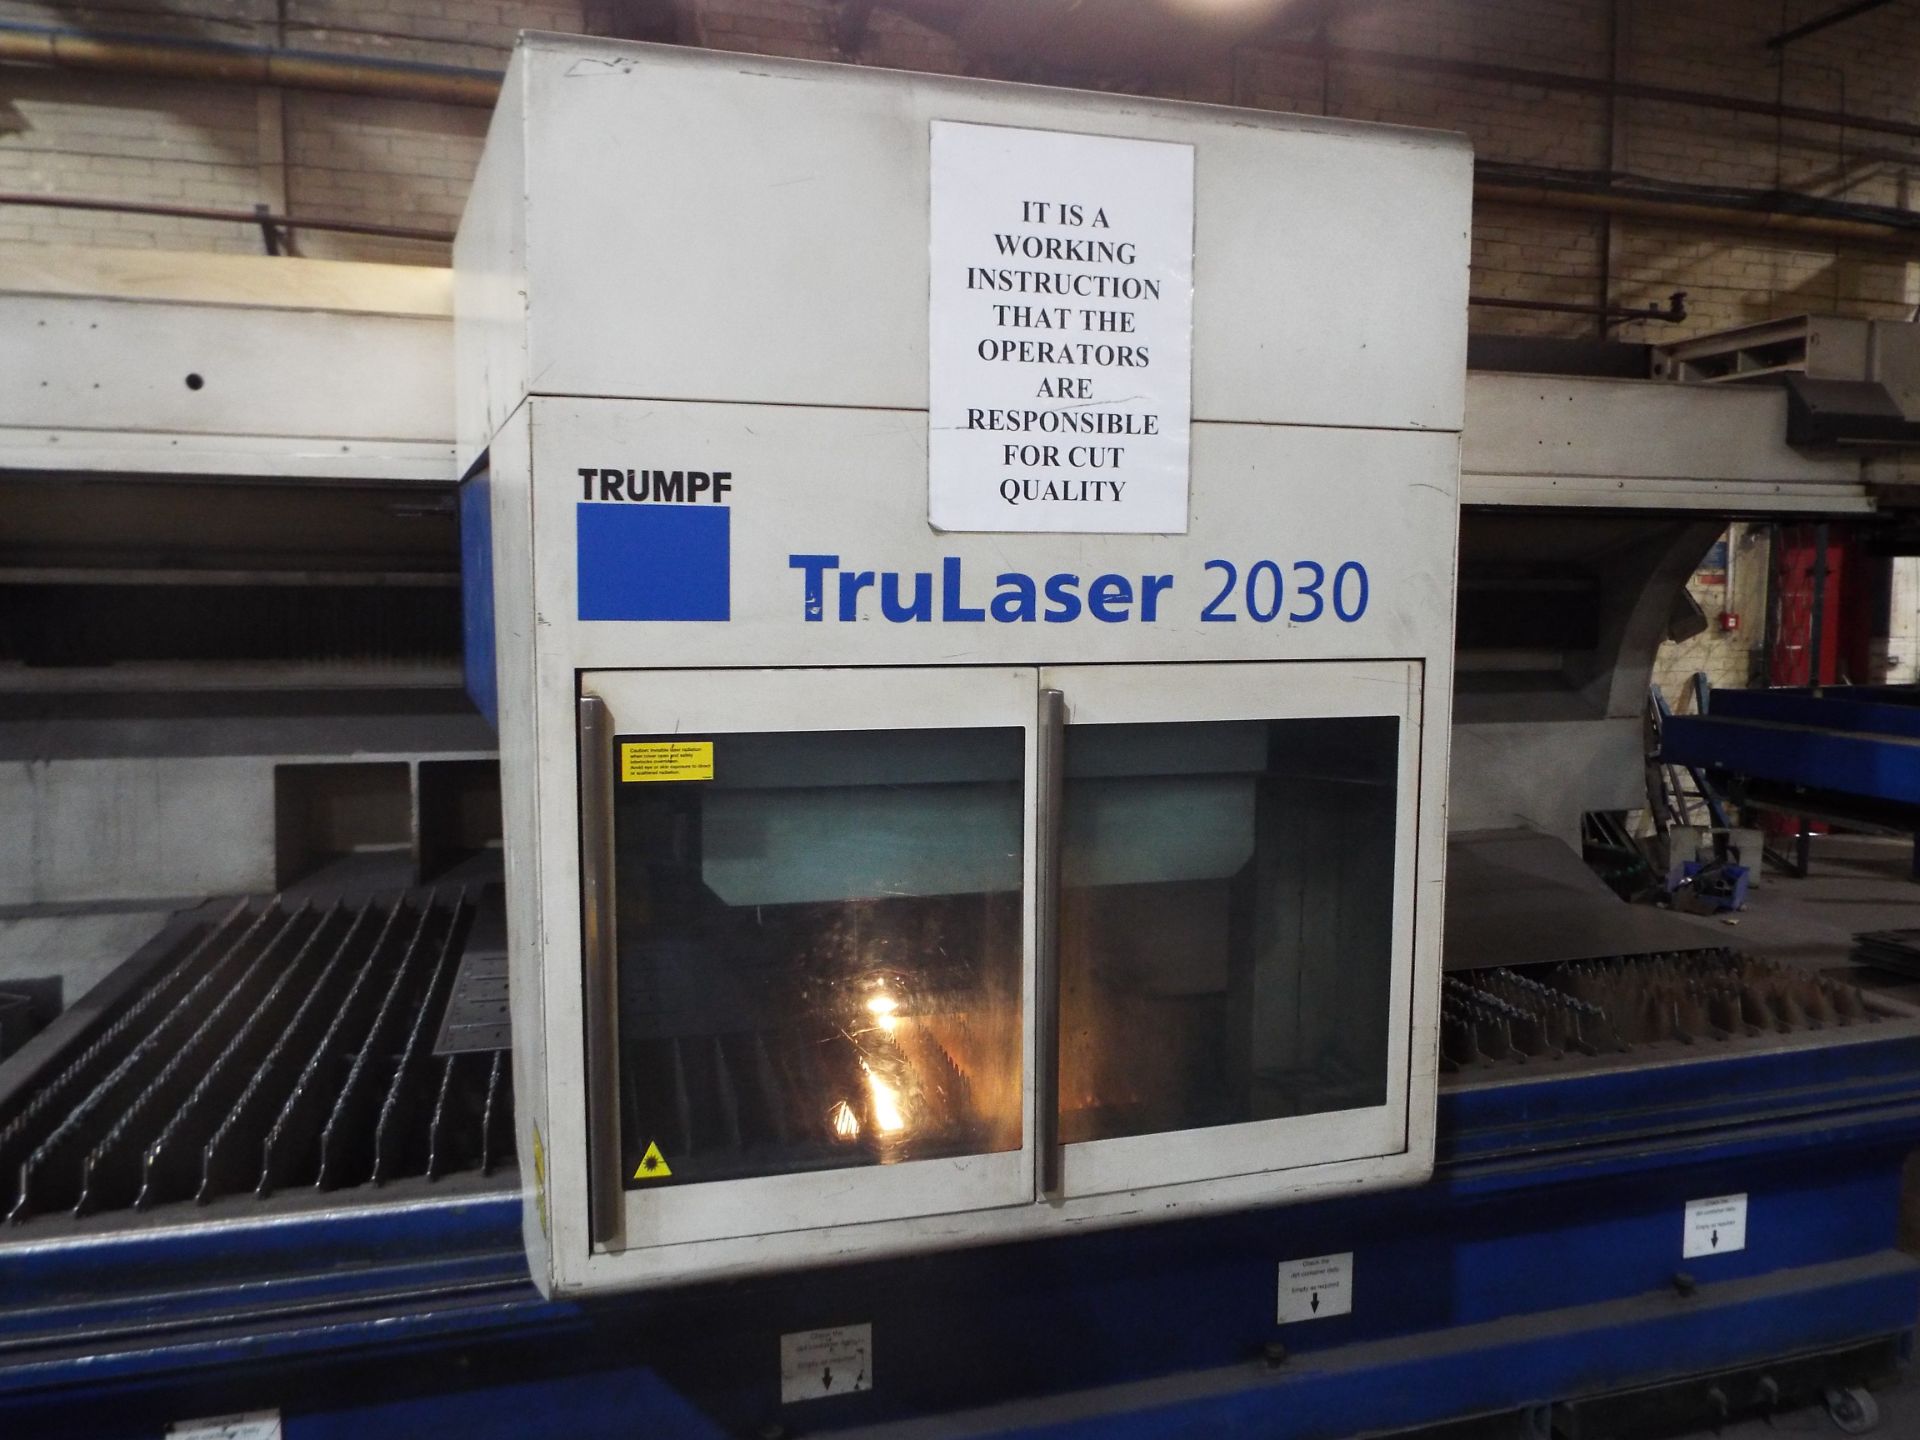 Trumpf TruLaser 2030 Trucoax 2000 Laser Cutting Cell. - Image 5 of 23